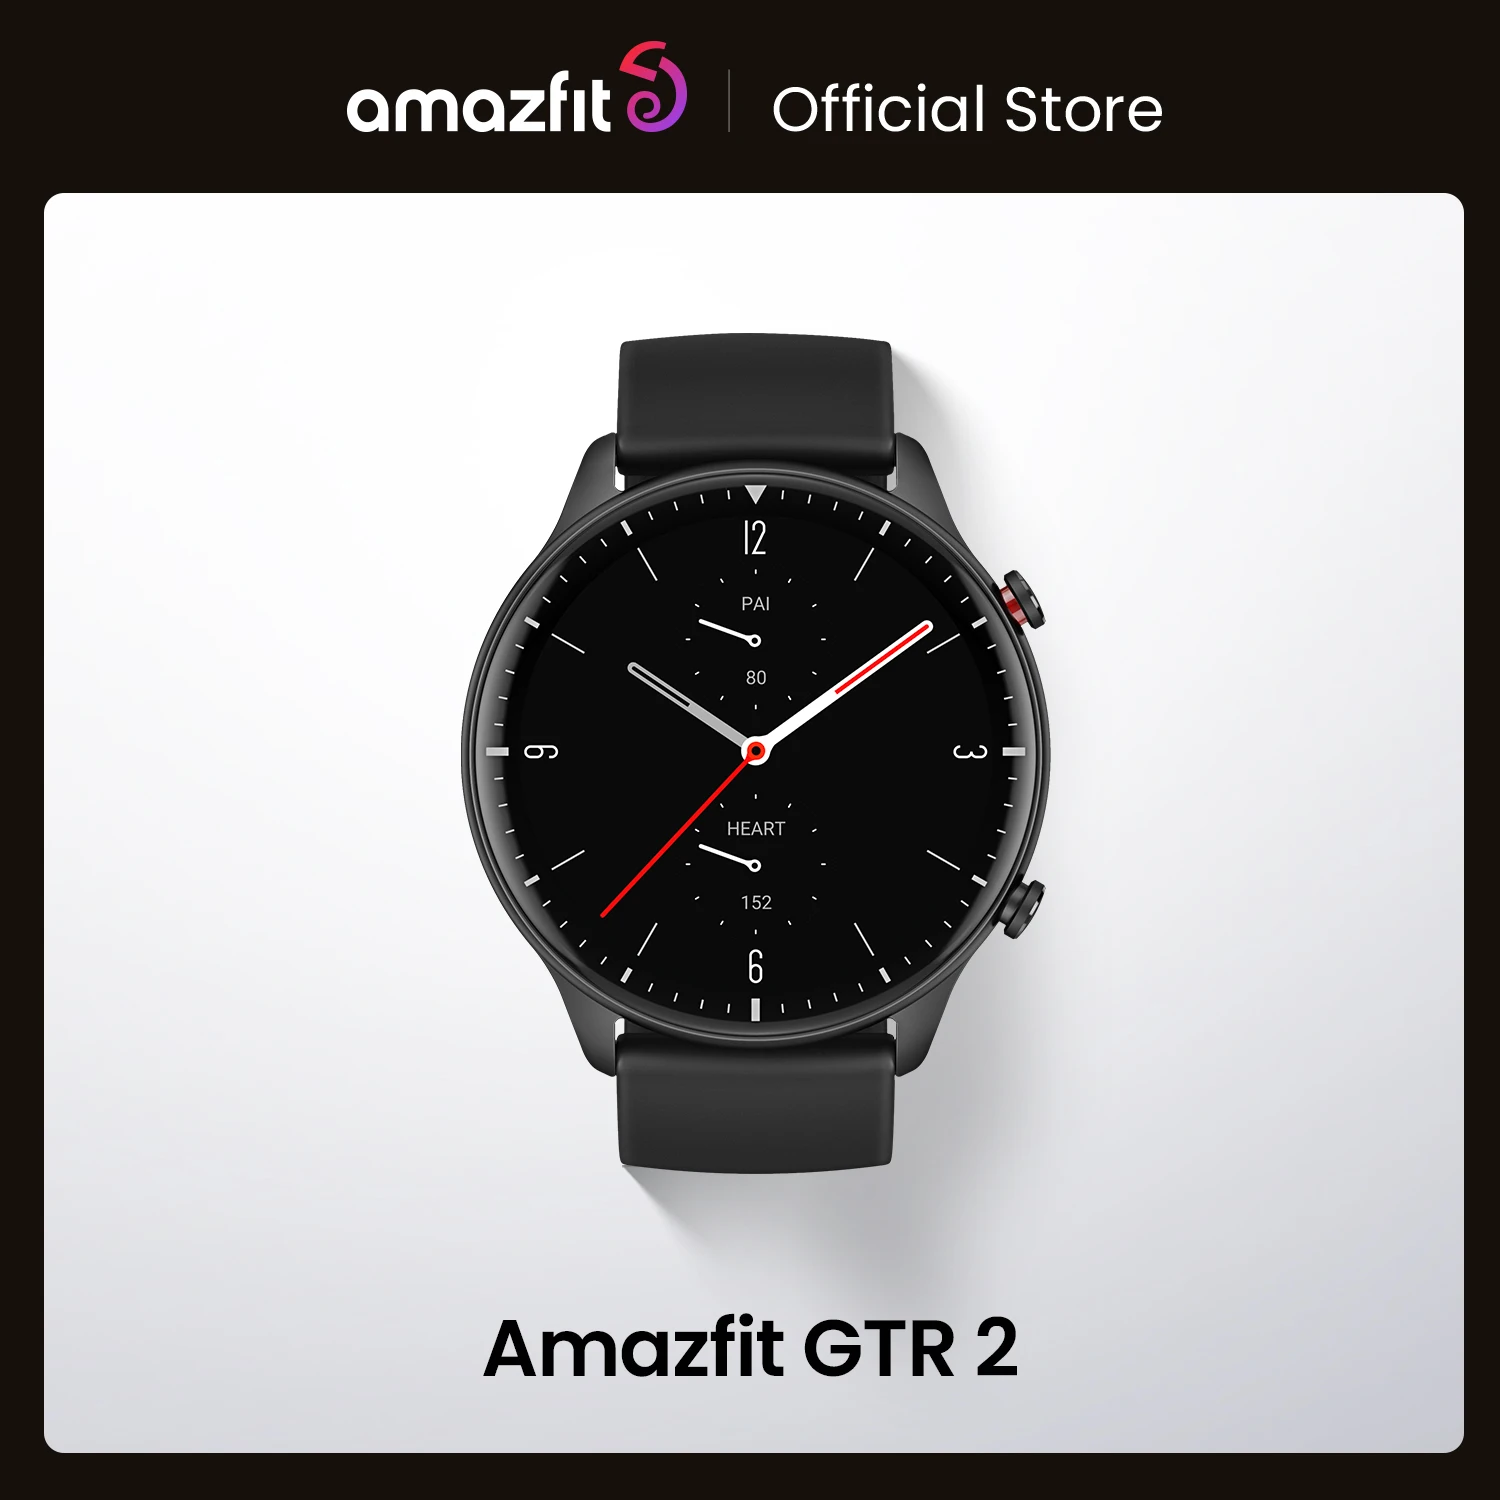 Original Amazfit GTR 2 Smartwatch 14-day Battery Life Sleep Monitoring Smart Watch Alexa Built-in For Android iOS Phone